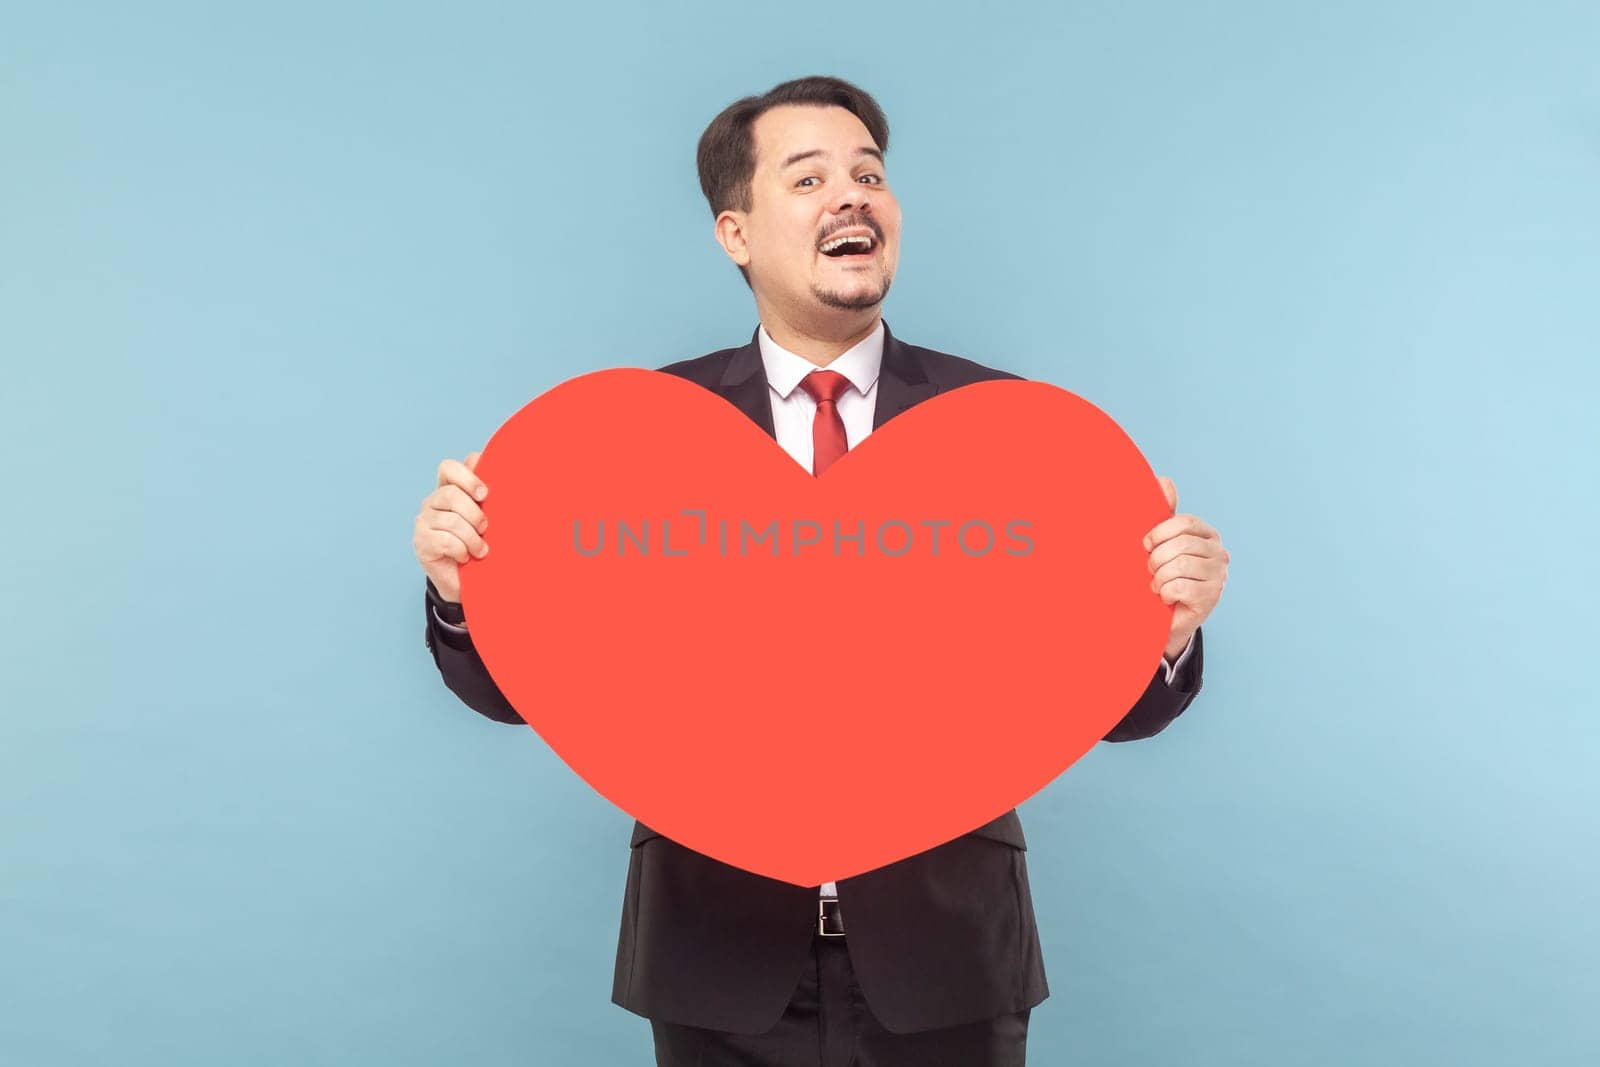 Portrait of satisfied joyful man with mustache standing holding big red card, expressing love and gentle, wearing black suit with red tie. Indoor studio shot isolated on light blue background.